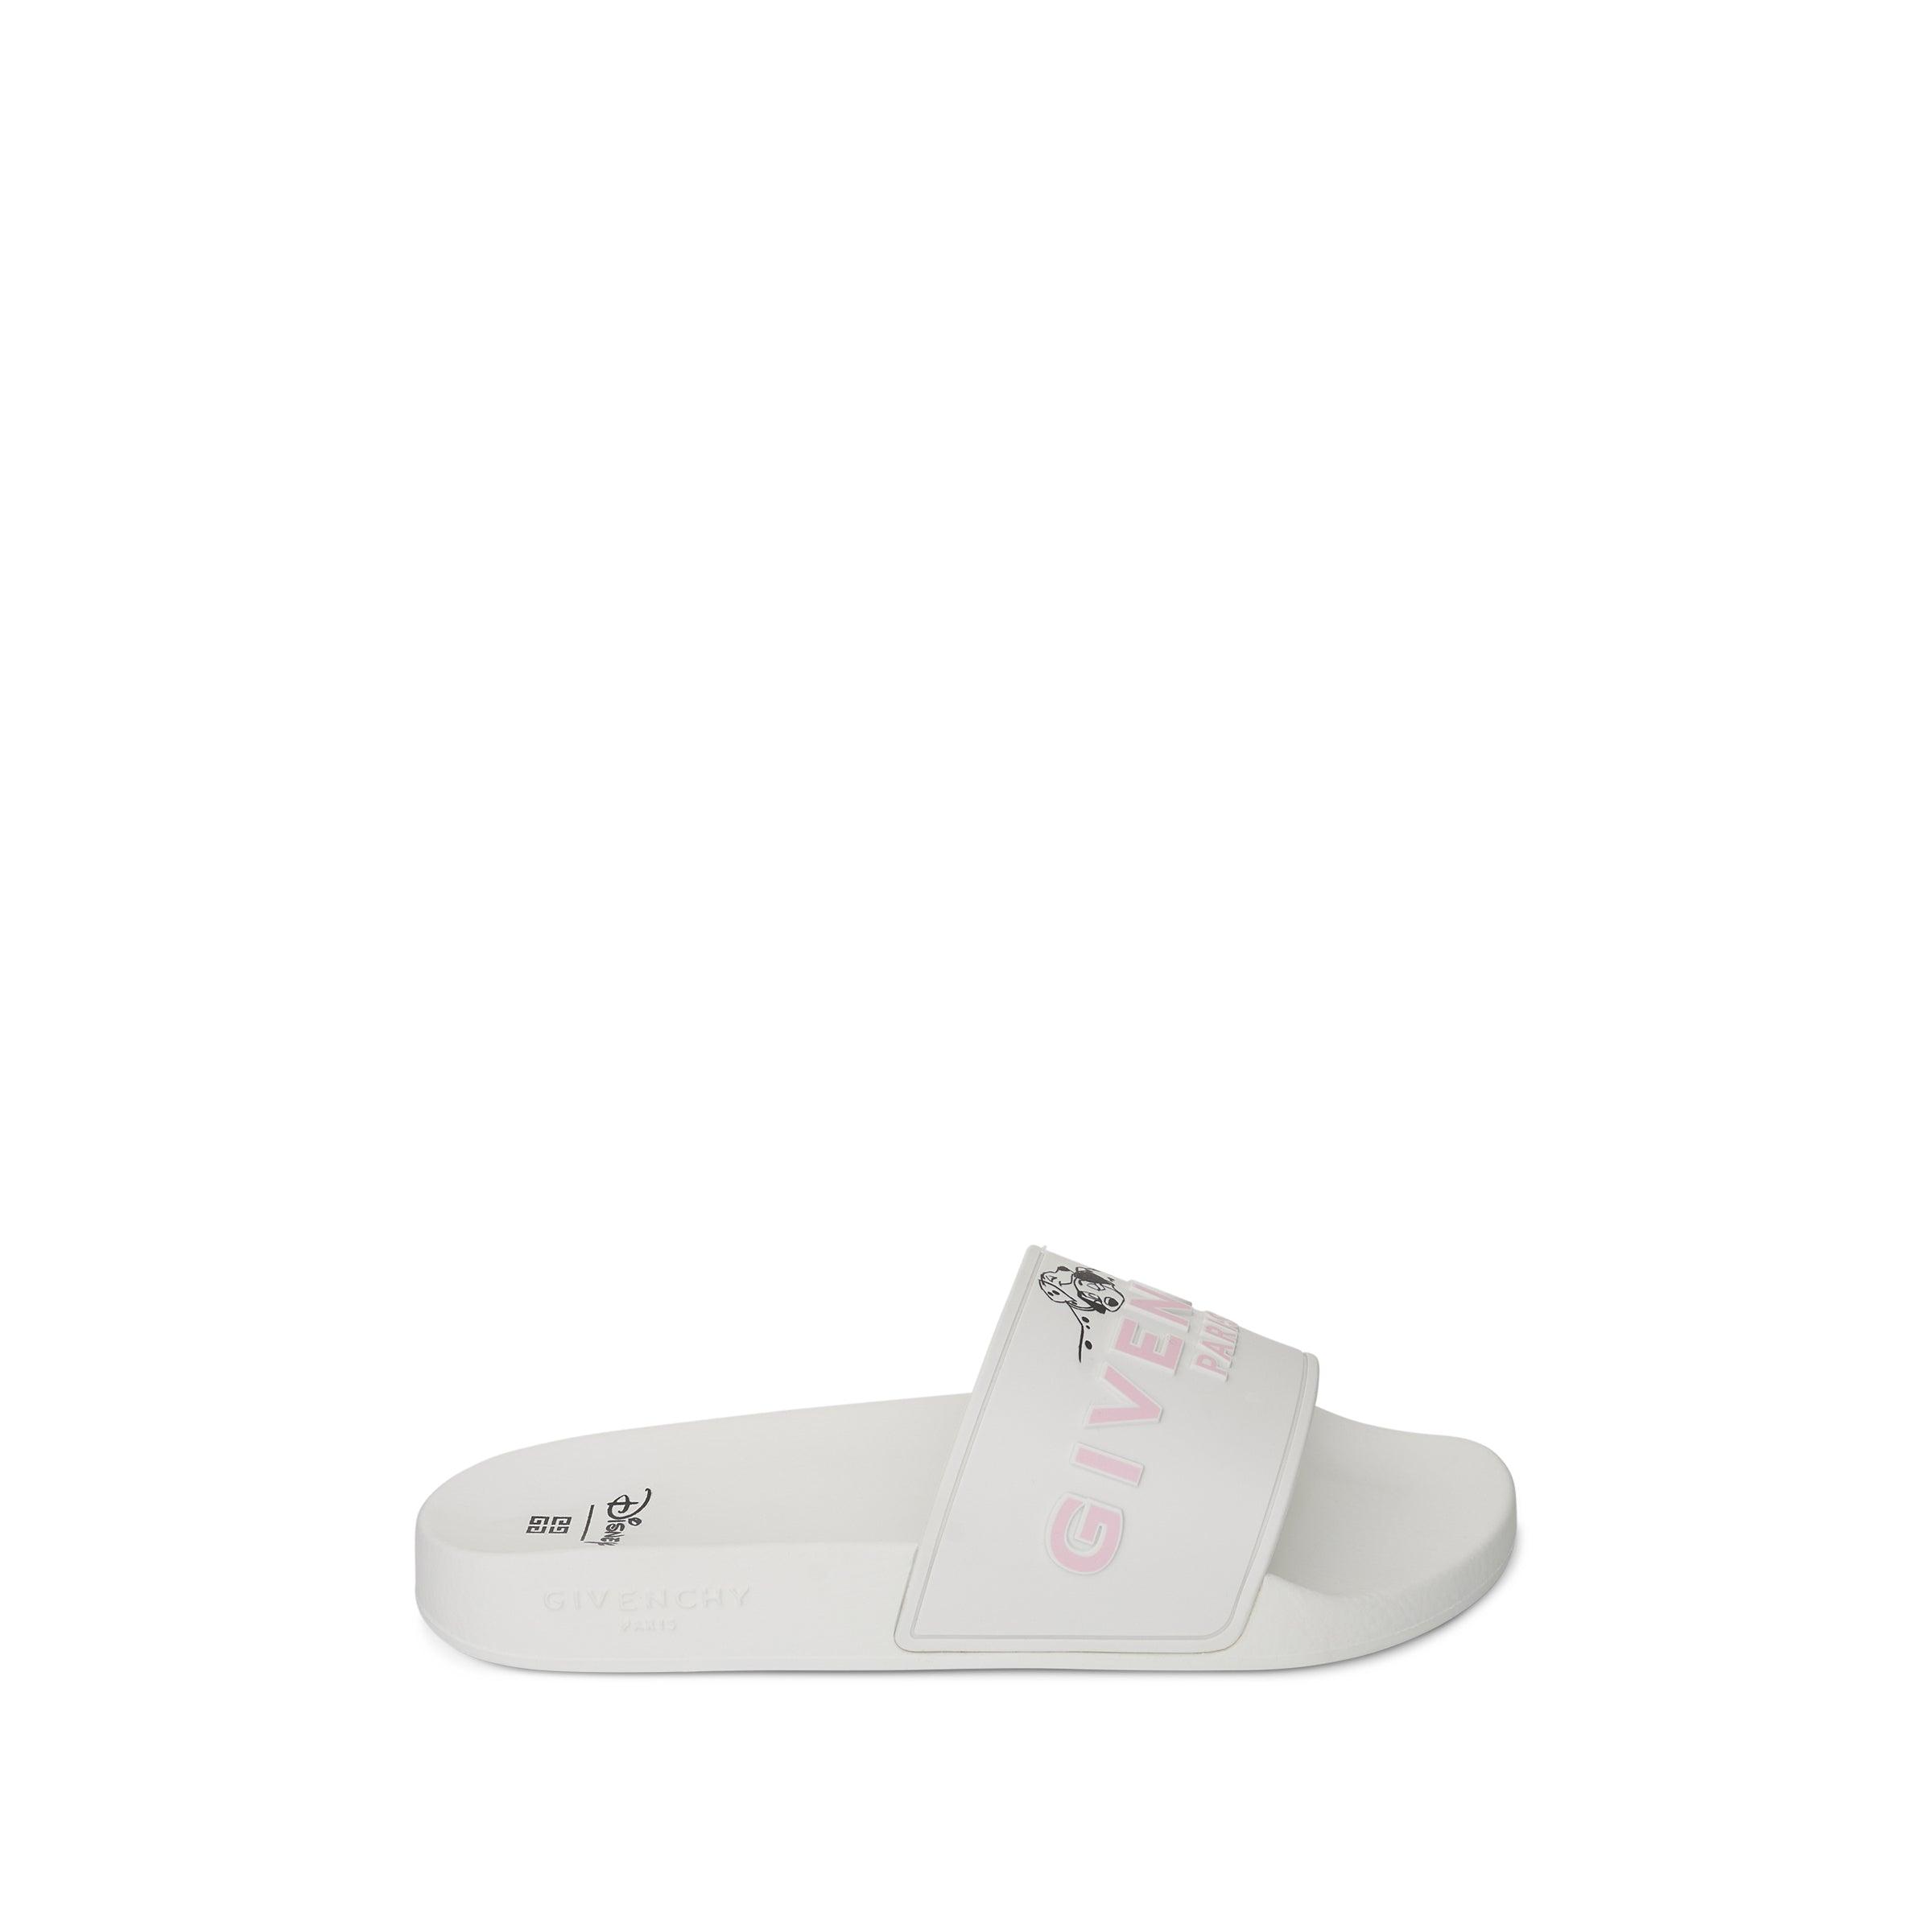 Givenchy Disney 101 Dalmatians Slide Sandals in White | Lyst